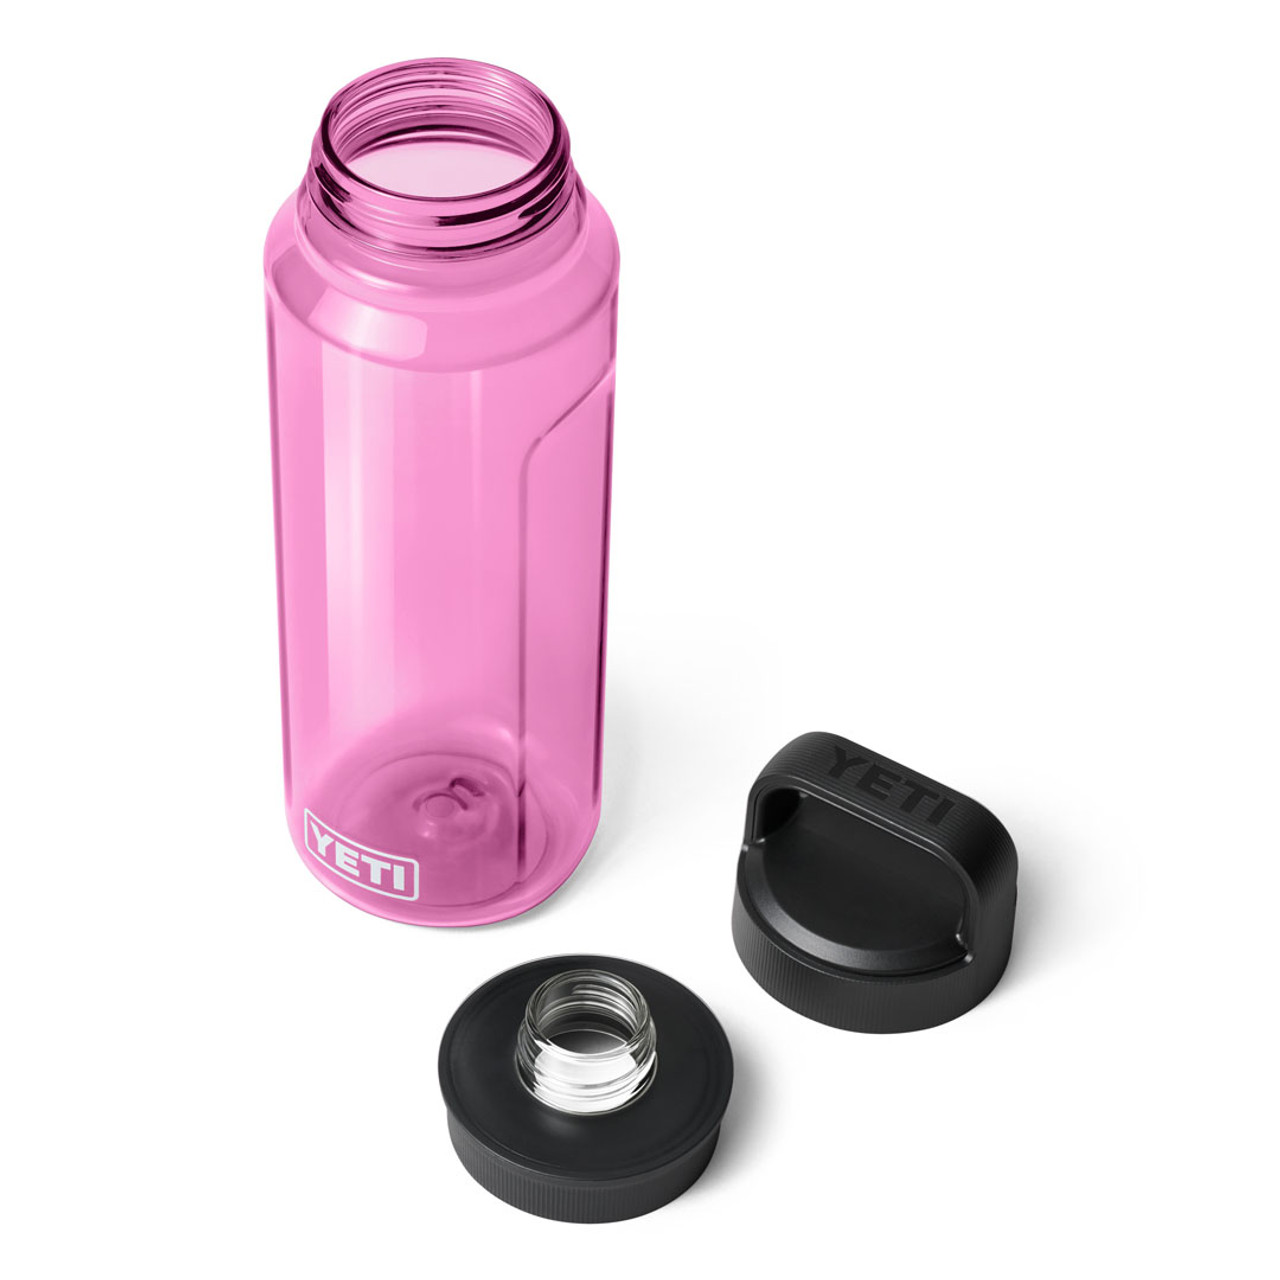 https://cdn11.bigcommerce.com/s-ppsyskcavg/images/stencil/1280x1280/products/68675/248135/YETI_Wholesale_Drinkware_Yonder_1L_Power_Pink_3qtr_Cap_Off_0888_B_2400x2400__47733.1694635191.jpg?c=2?imbypass=on